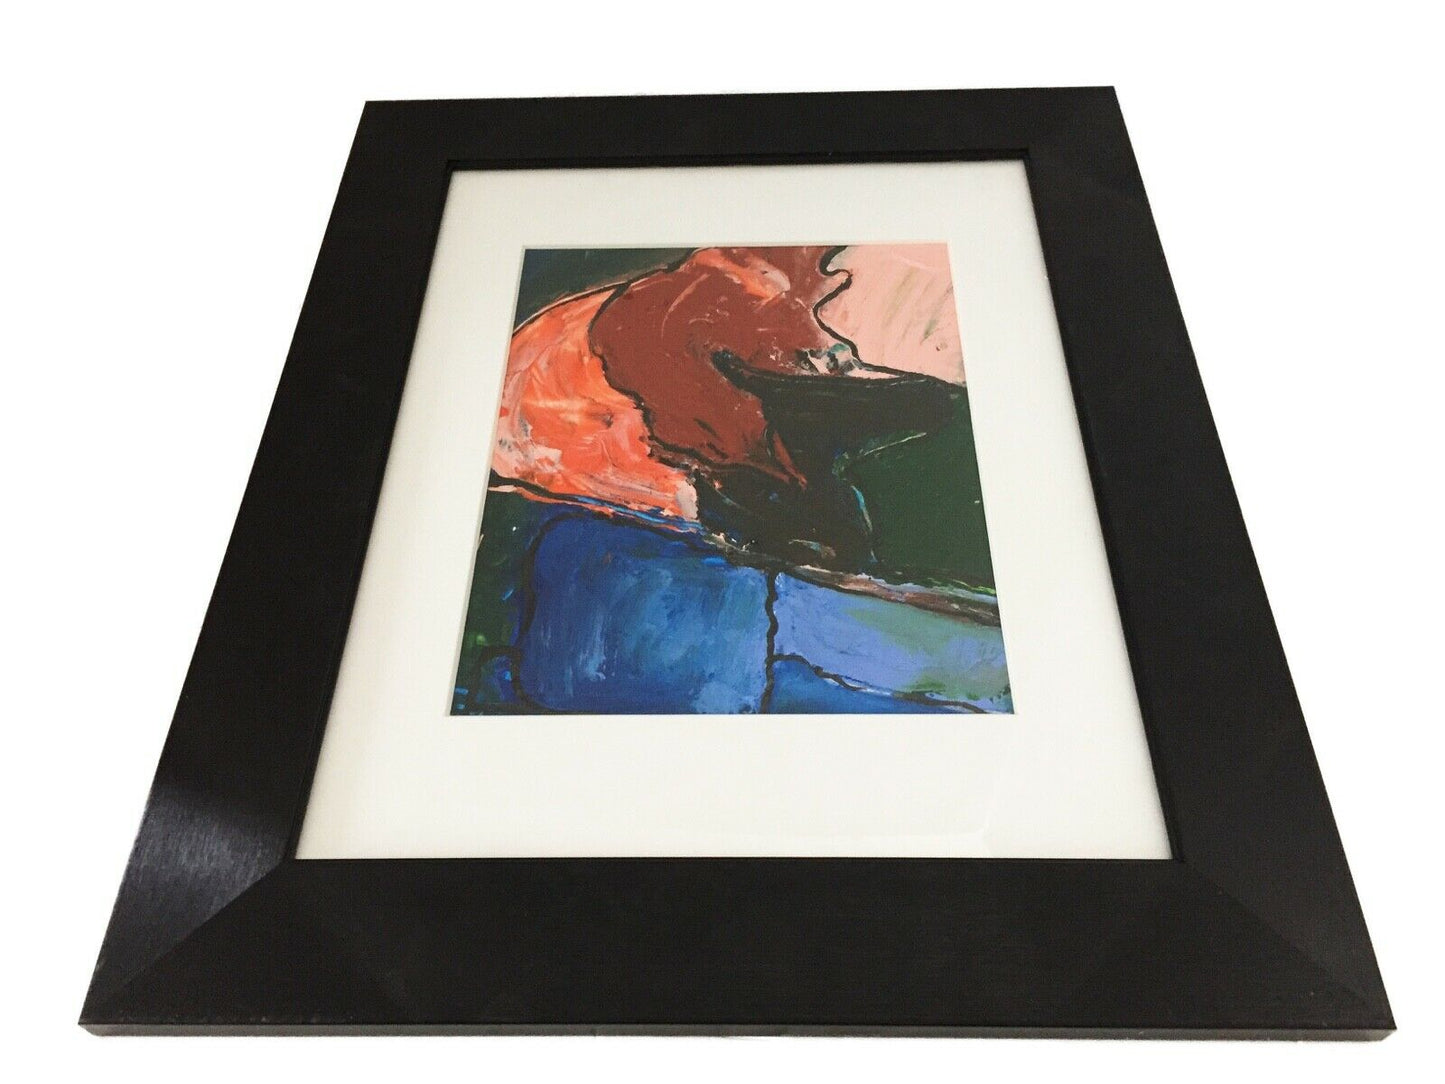 Acrylic on Paper Framed Abstract 17.75" by 14.75" #2005